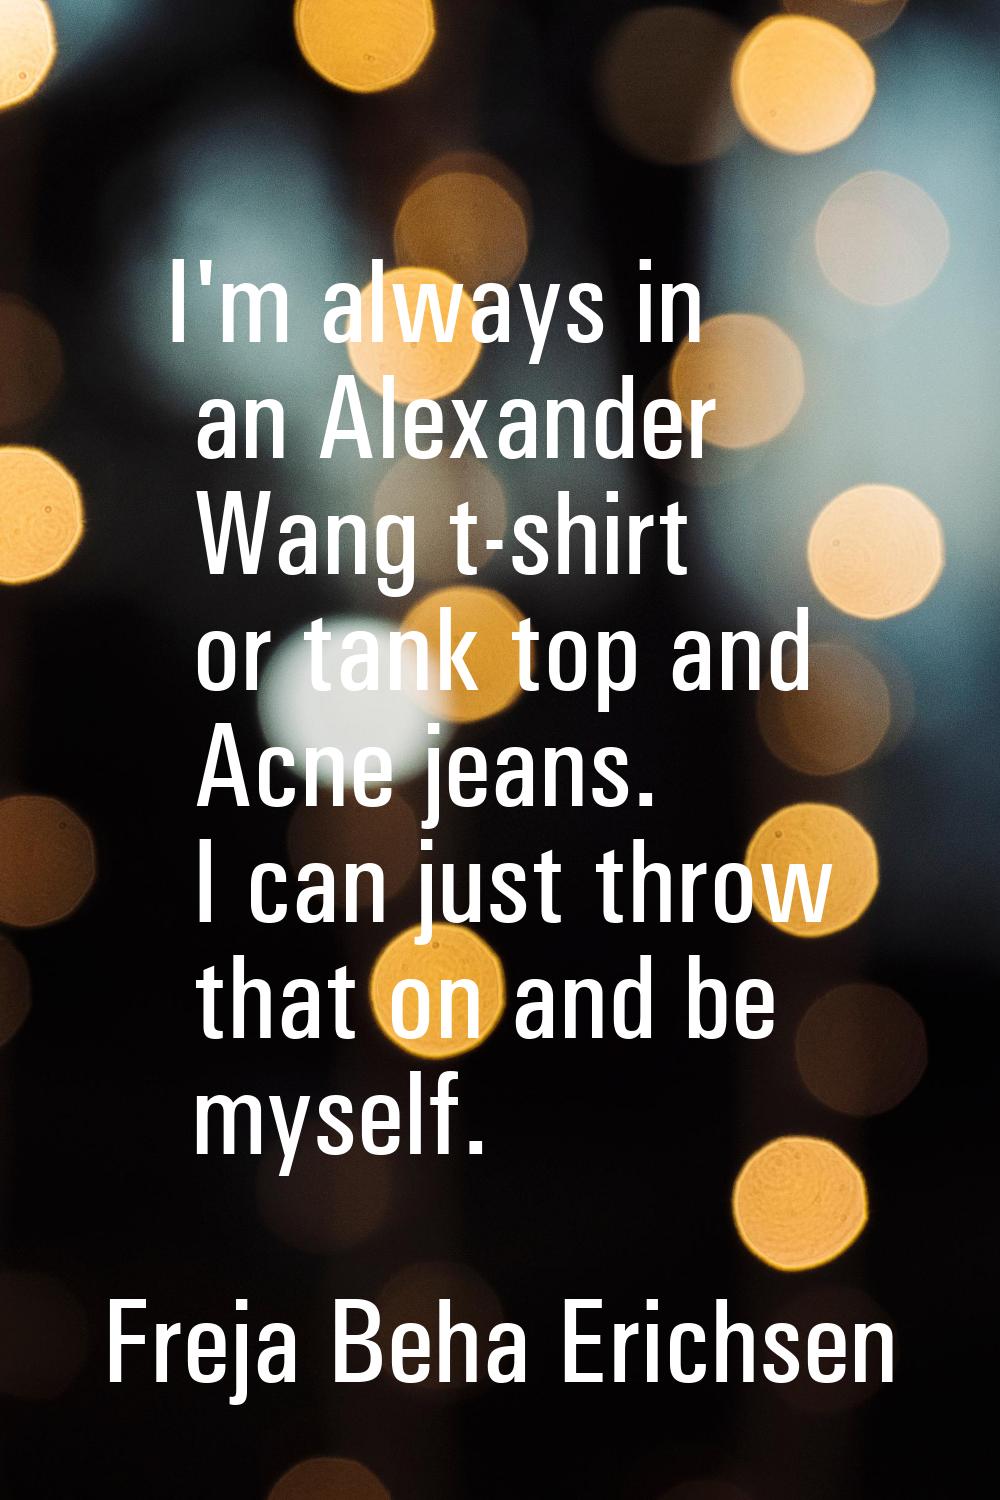 I'm always in an Alexander Wang t-shirt or tank top and Acne jeans. I can just throw that on and be